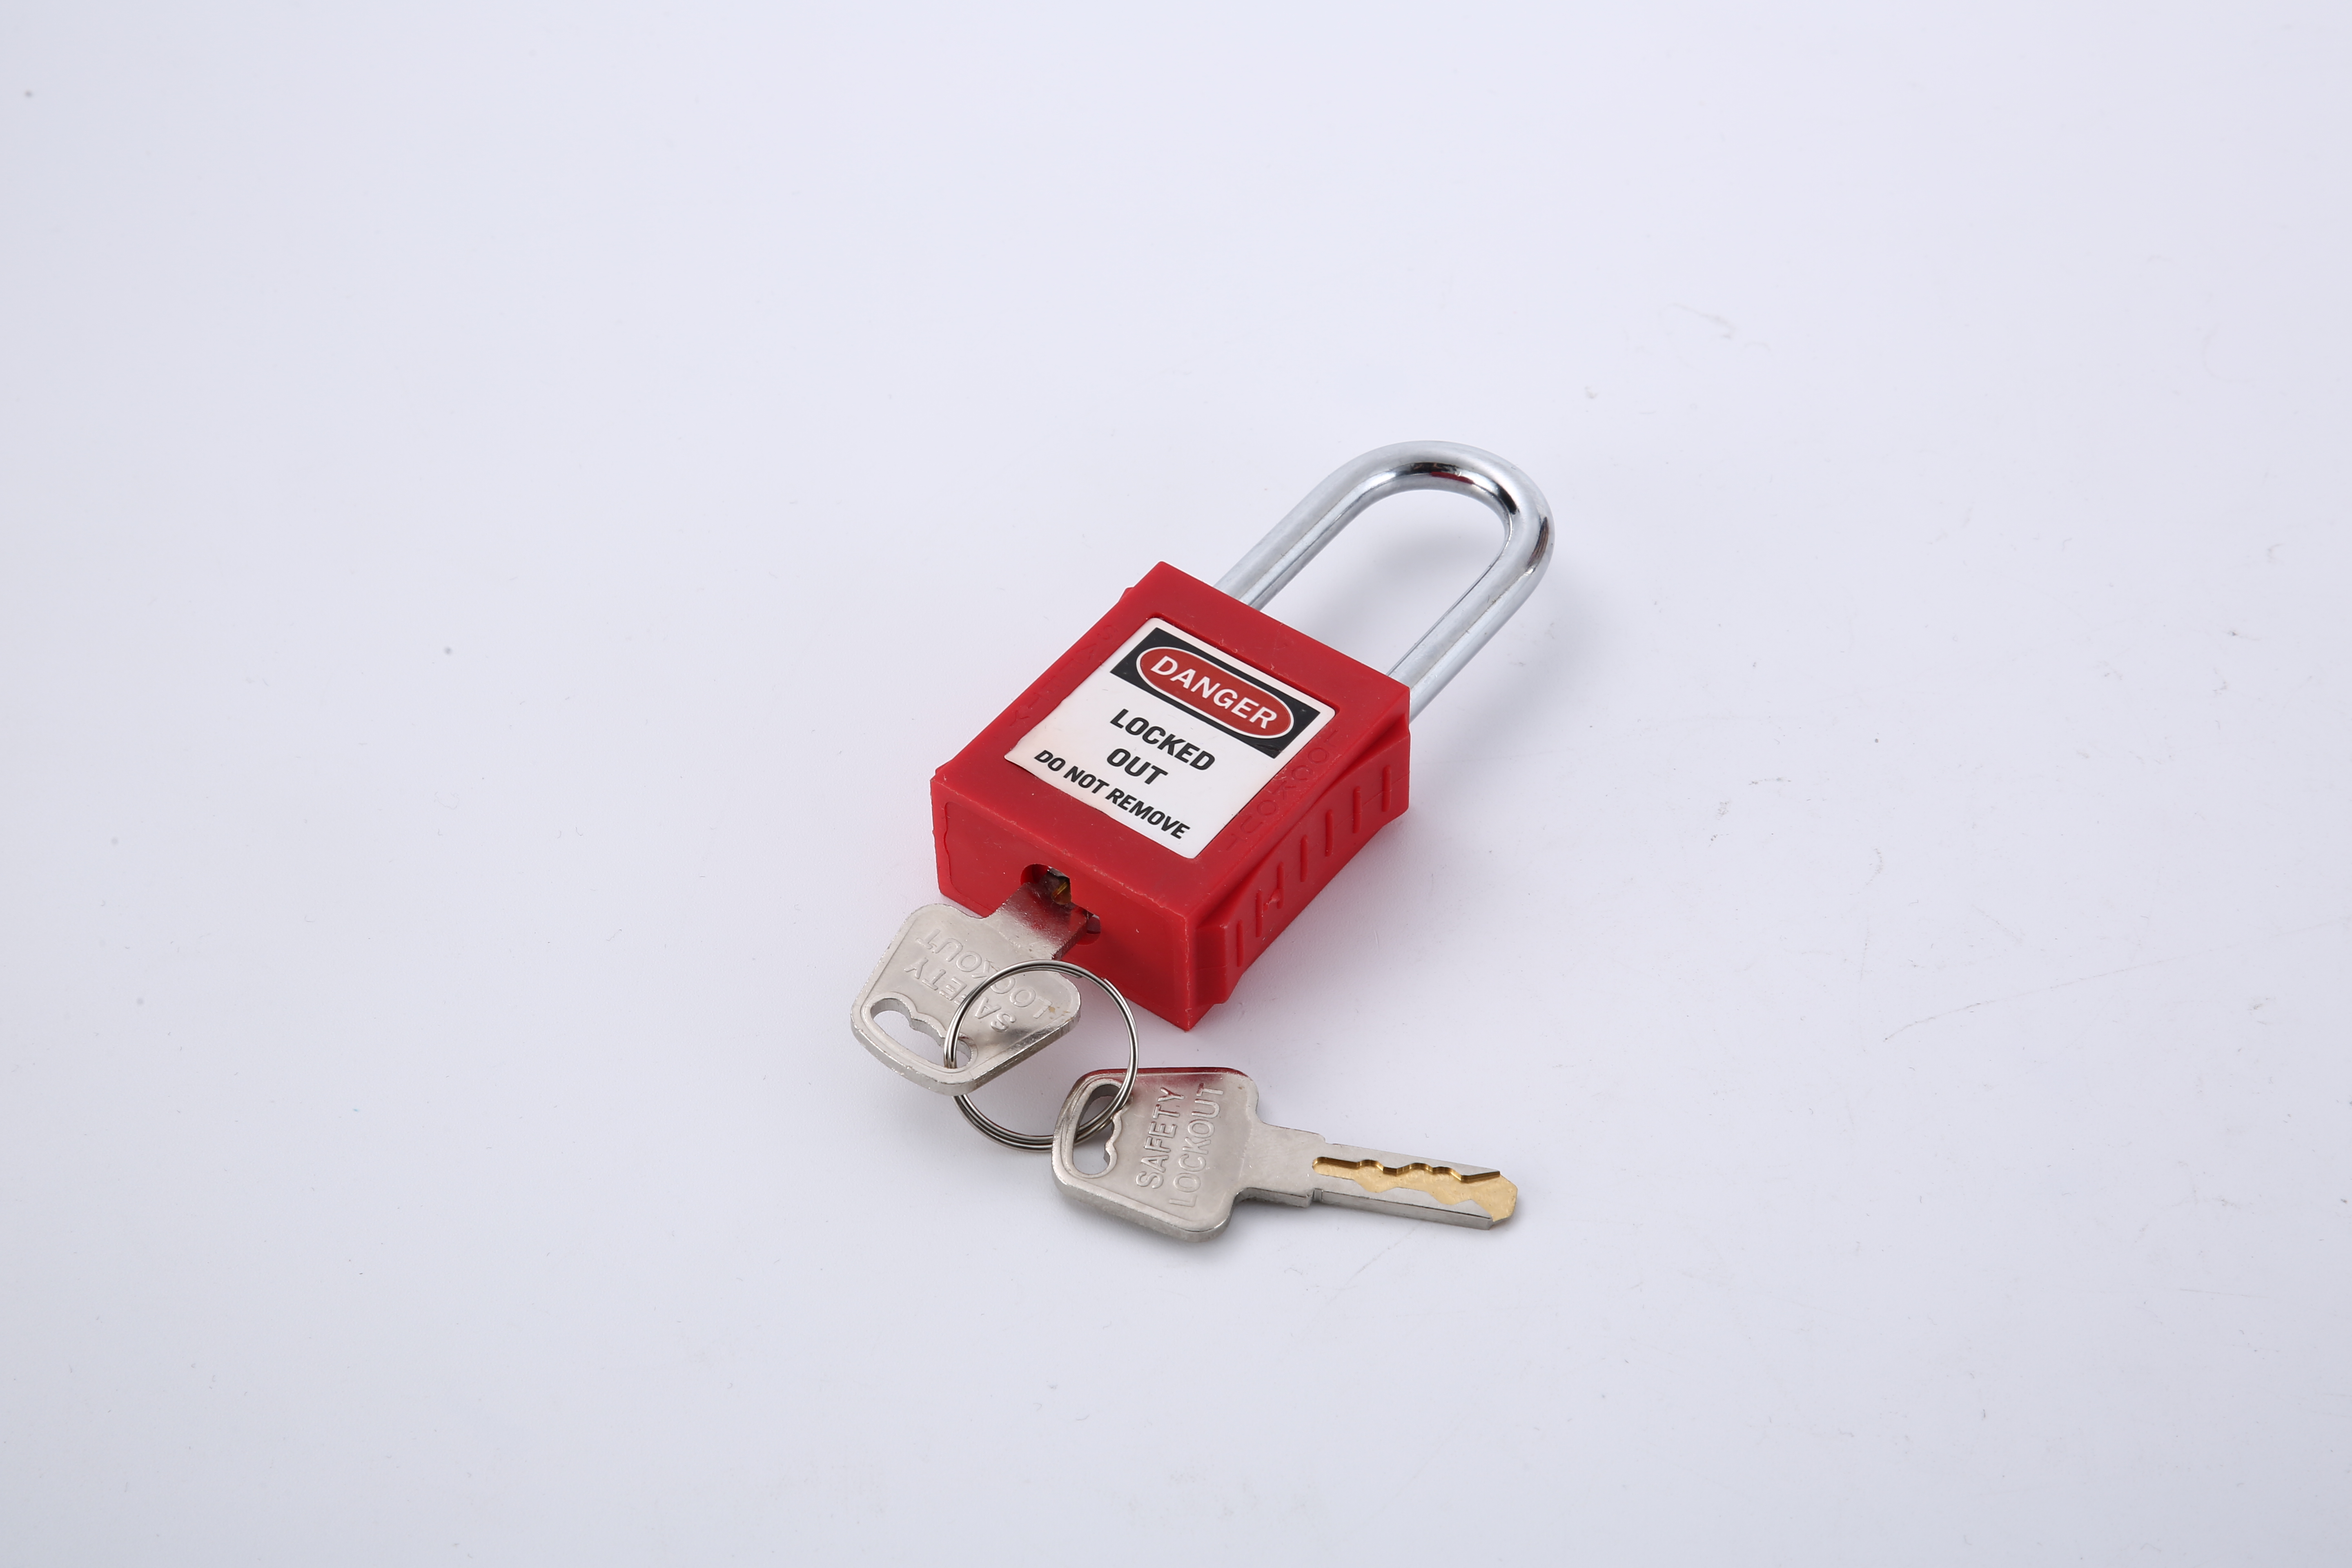 Precautions when locking and tagging out safety locks